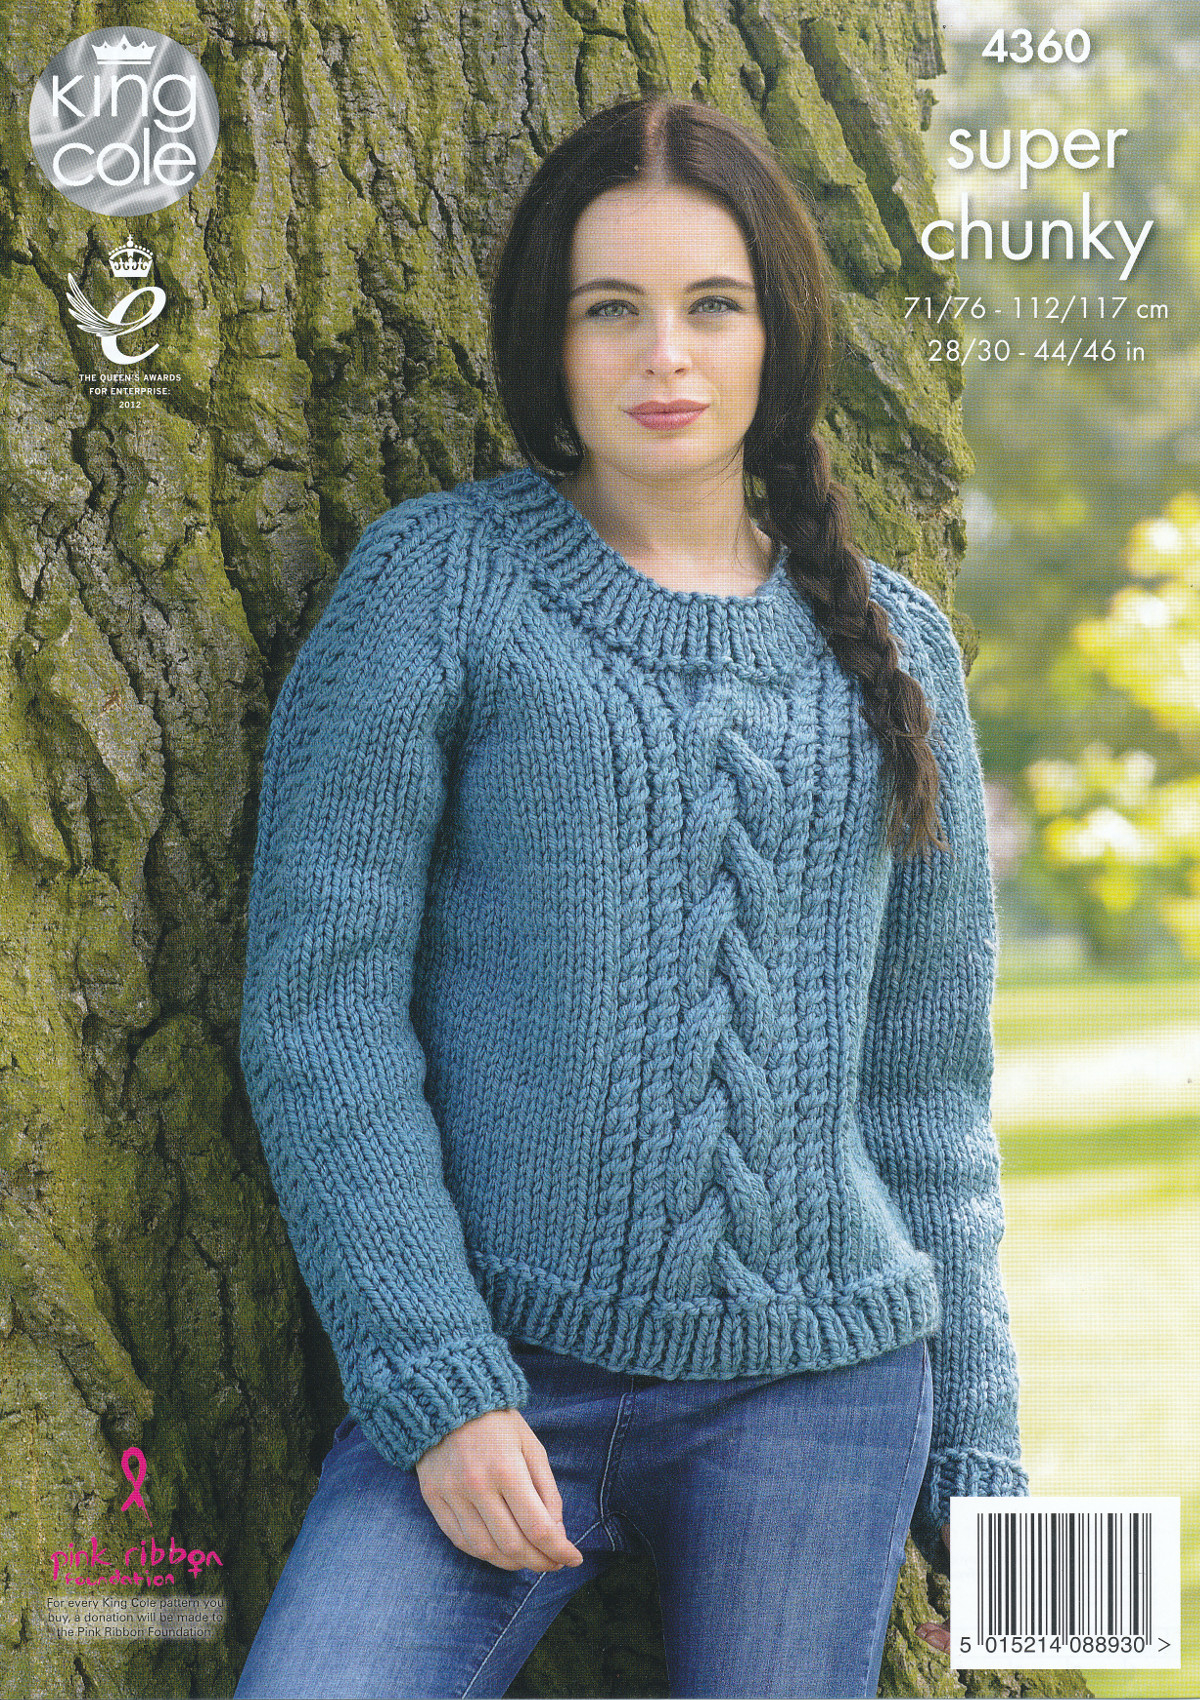 Knit Sweaters Patterns Details About Ladies Super Chunky Knitting Pattern King Cole Cable Knit Sweaters Jumpers 4360